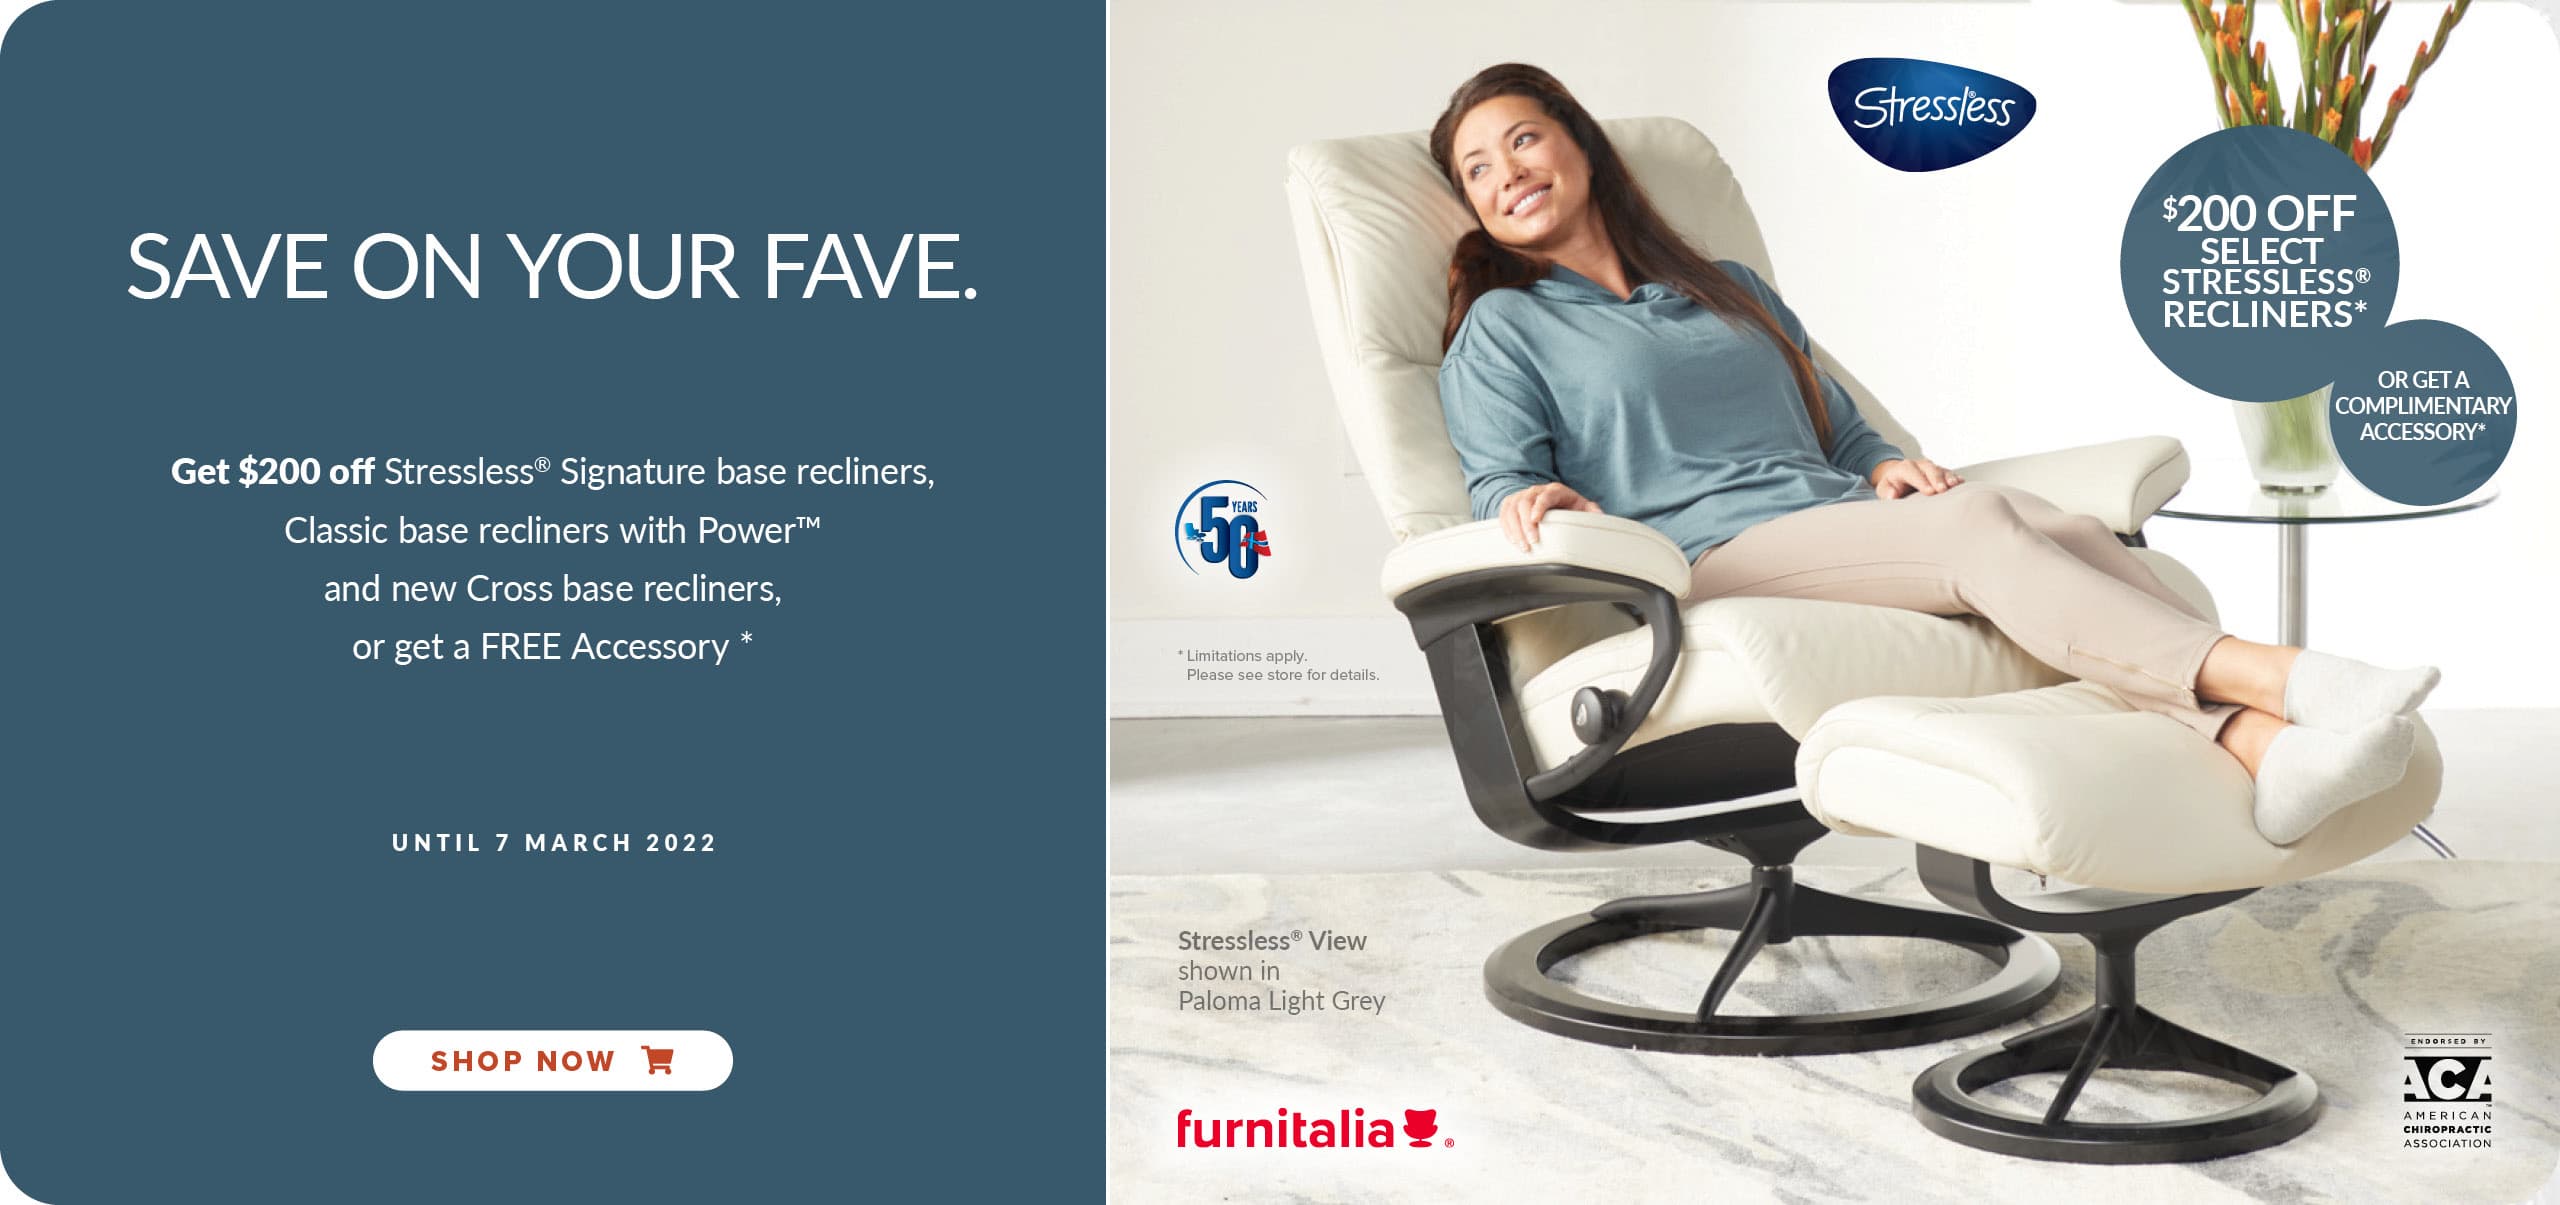 Stressless® Base Plus Promo: Save $200 OFF select recliners Or get a free Accessory